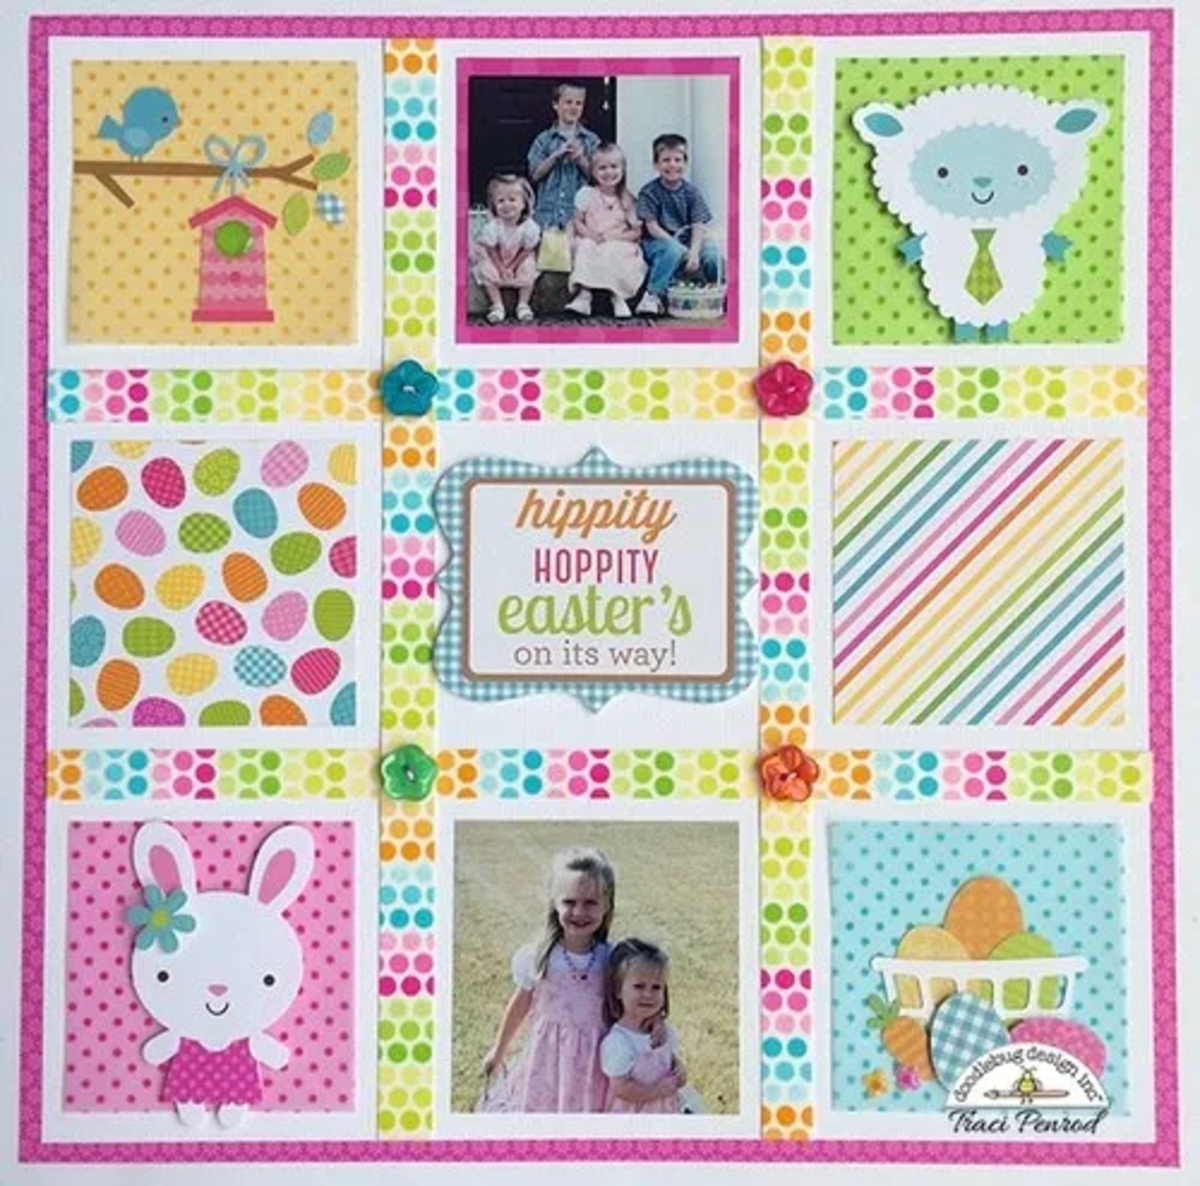 Make minuses and crosses (tic-tac-toe) style grid from washi tape. In each gap, add a photo or embellishment.